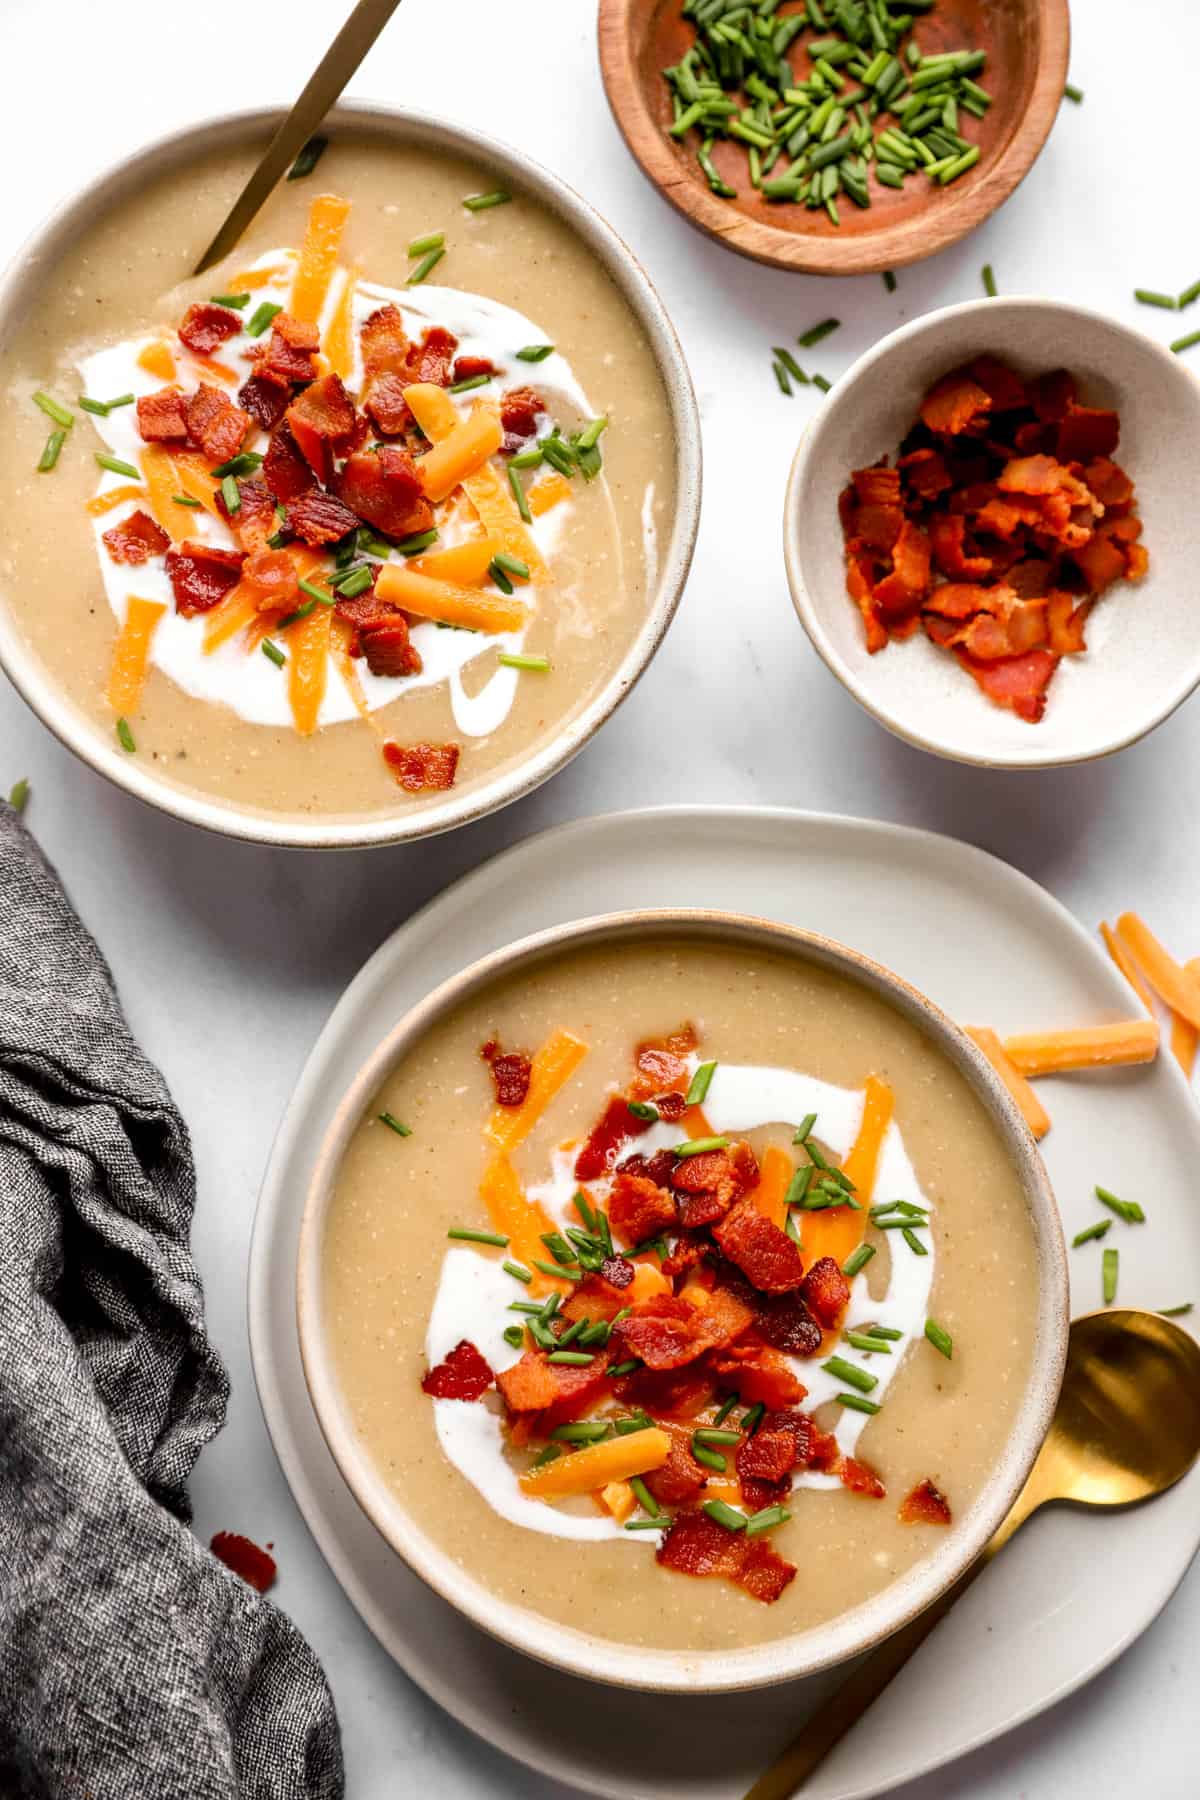 The top two bowls were filled with potato soup, and there was a smaller bowl of bacon slices on the side.